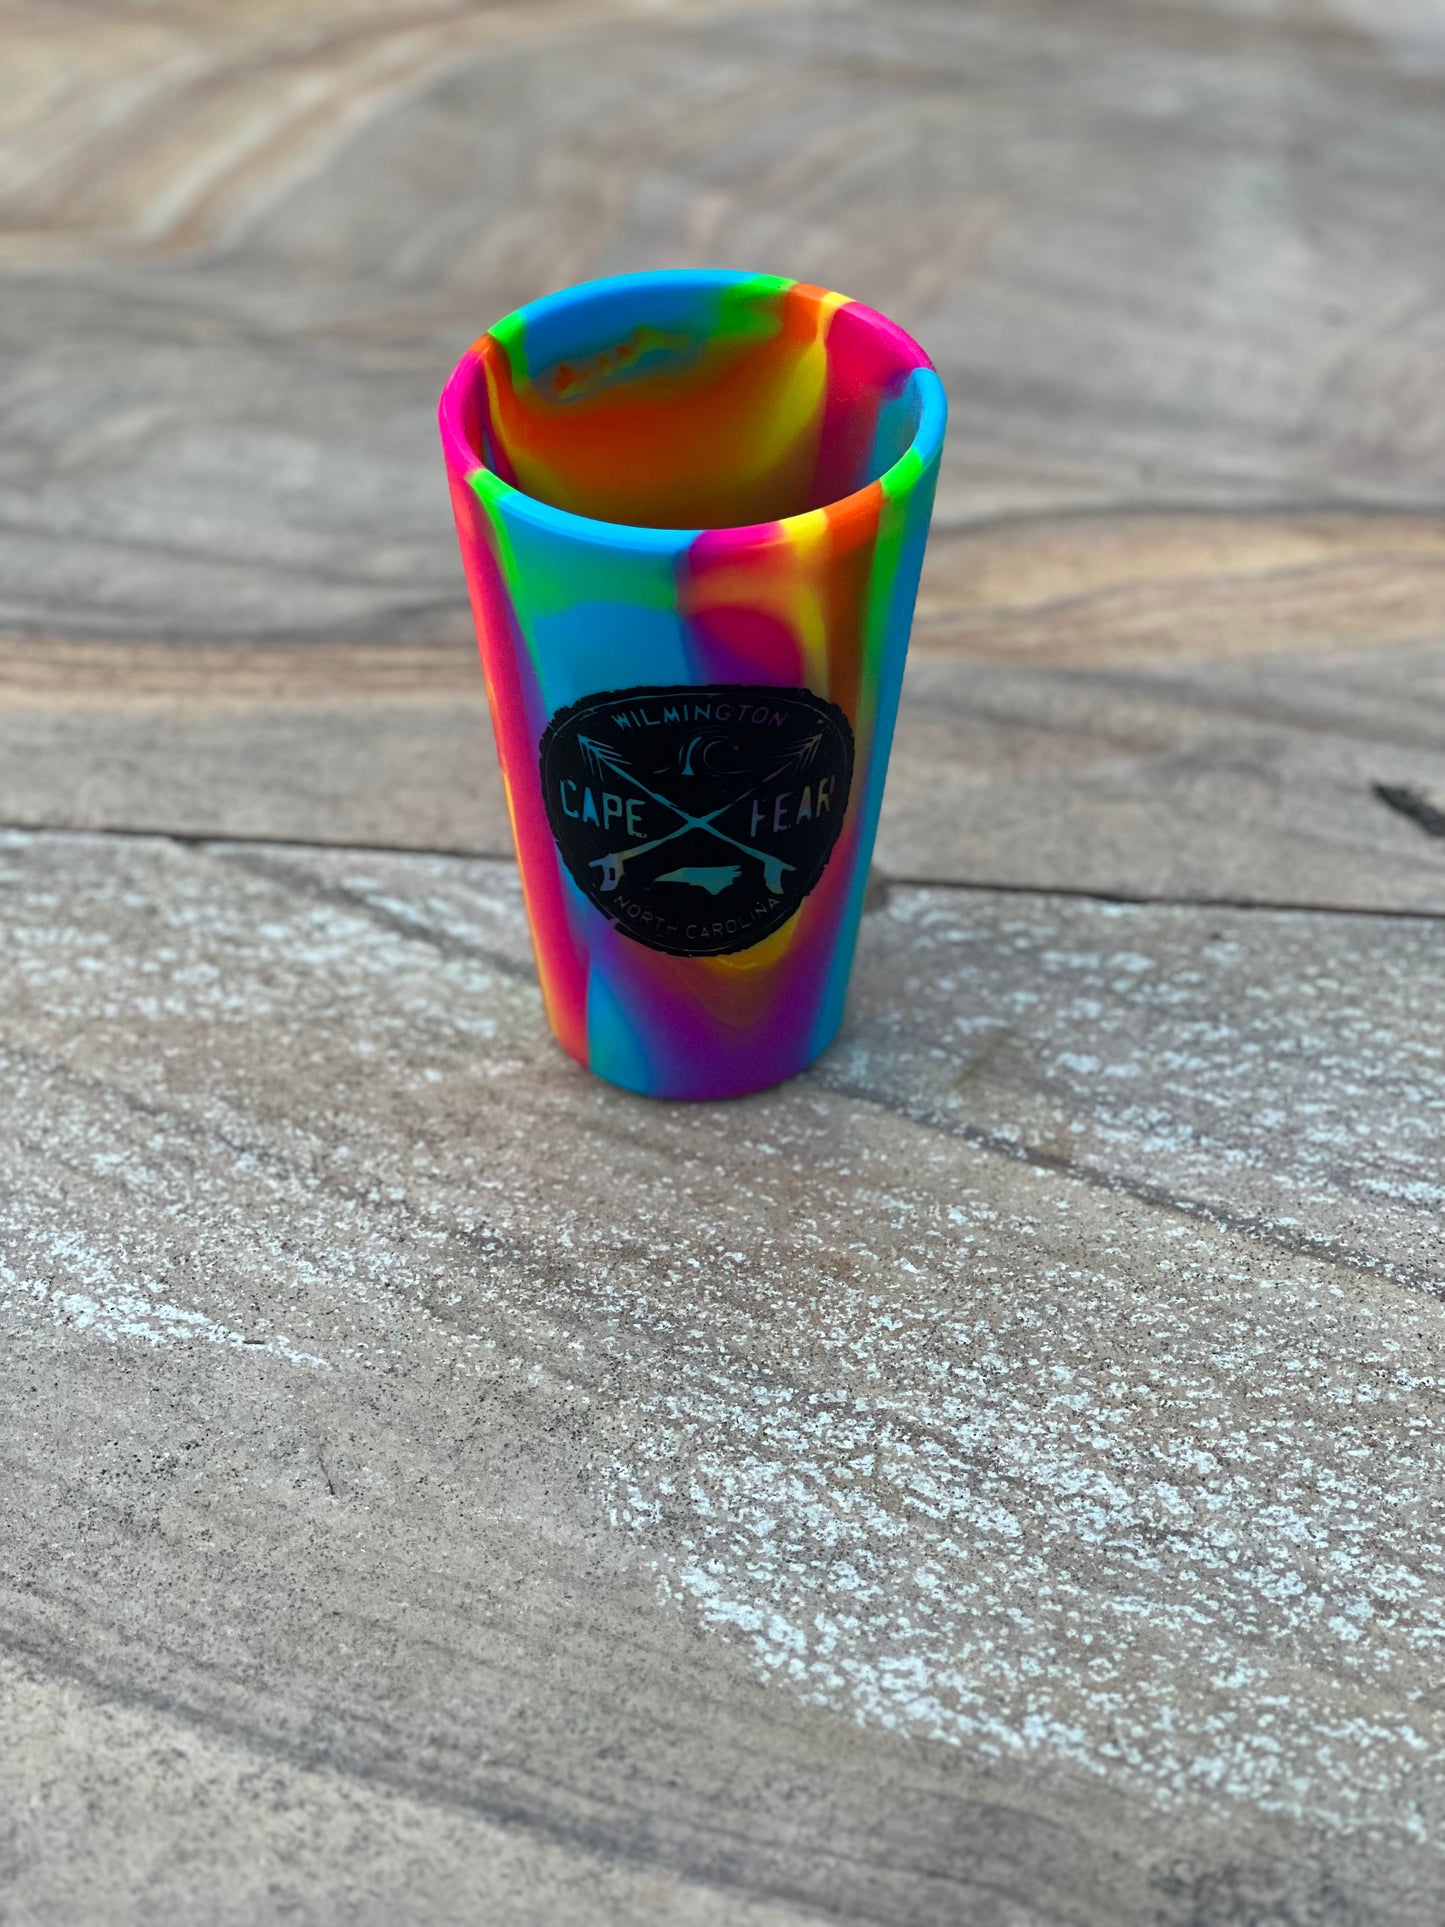 Cape Fear Waves  - 16 oz Silicone Cup  - Tie dye